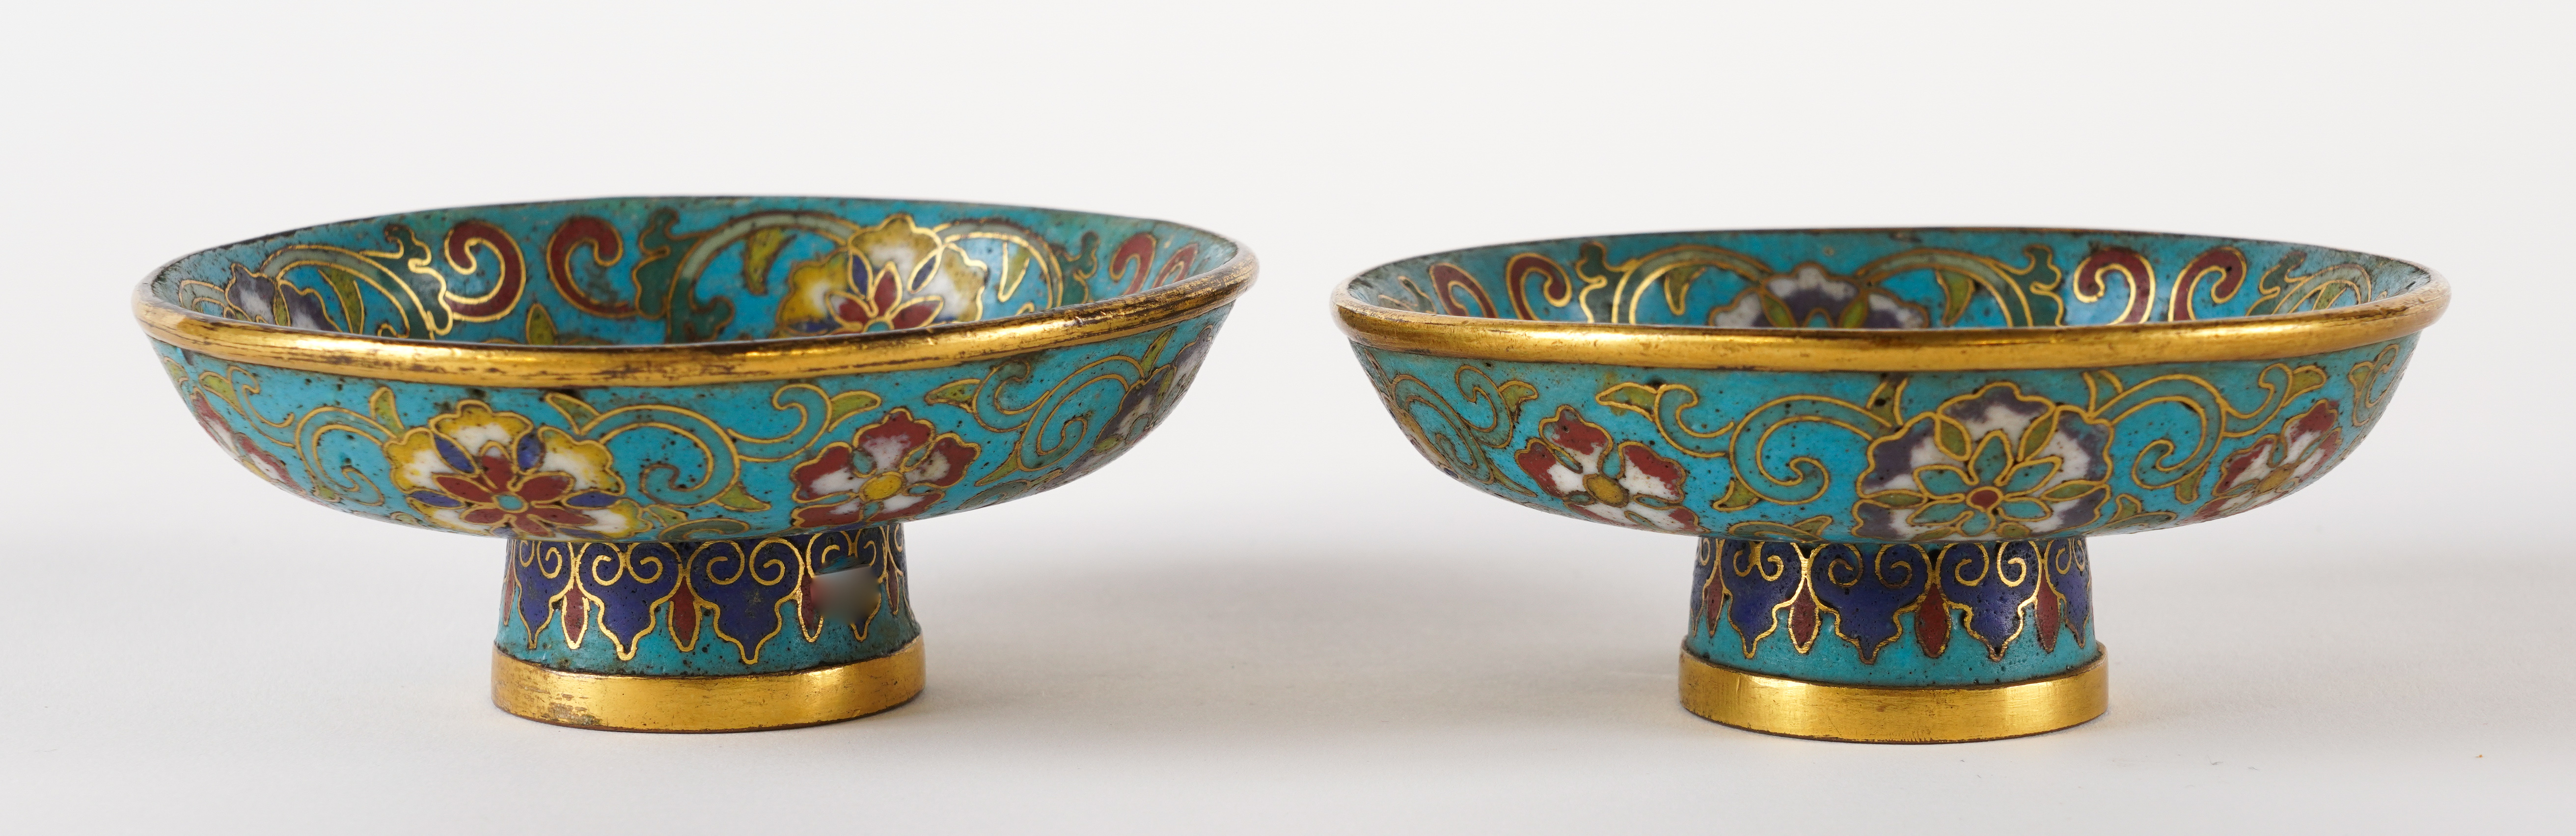 A PAIR OF CHINESE SMALL GILT-BRONZE AND CLOISONNE ENAMEL STEM DISHES (2) - Image 6 of 6